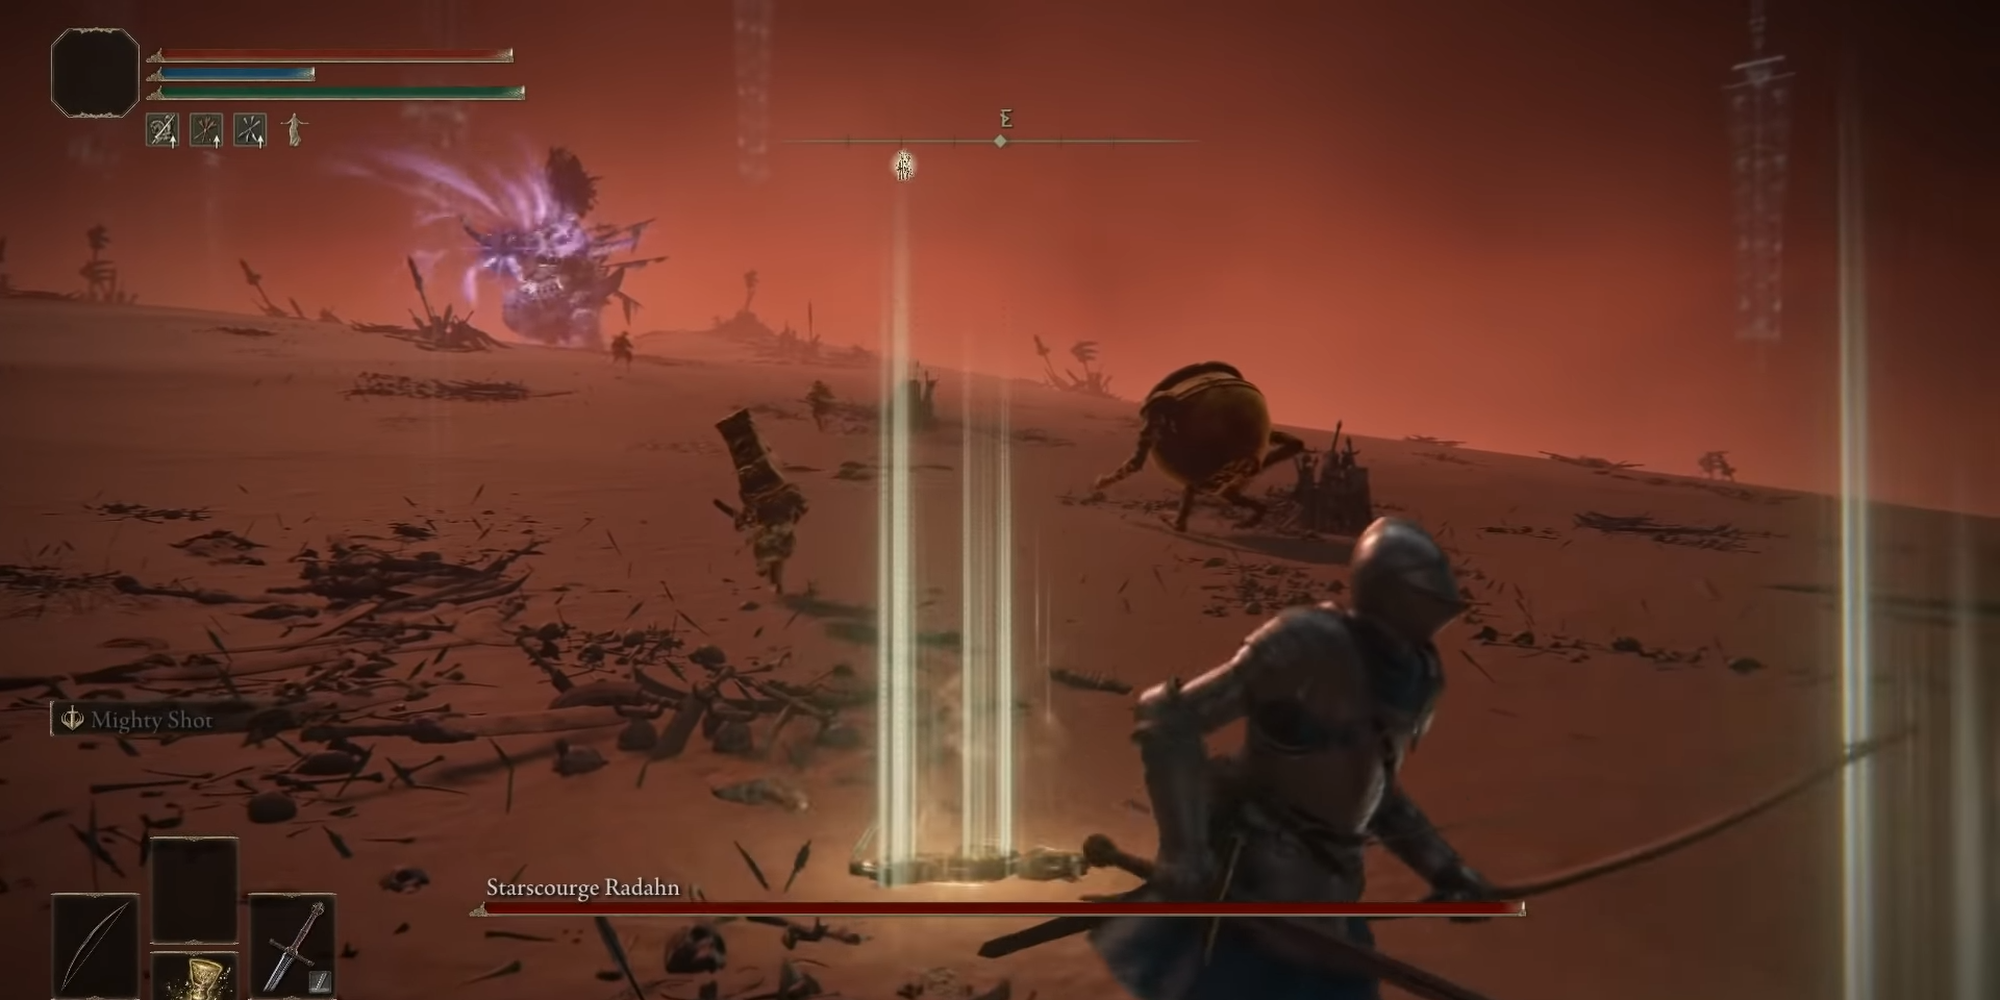 This image shows phantoms being summoned during the Starscourge Radahn boss battle.